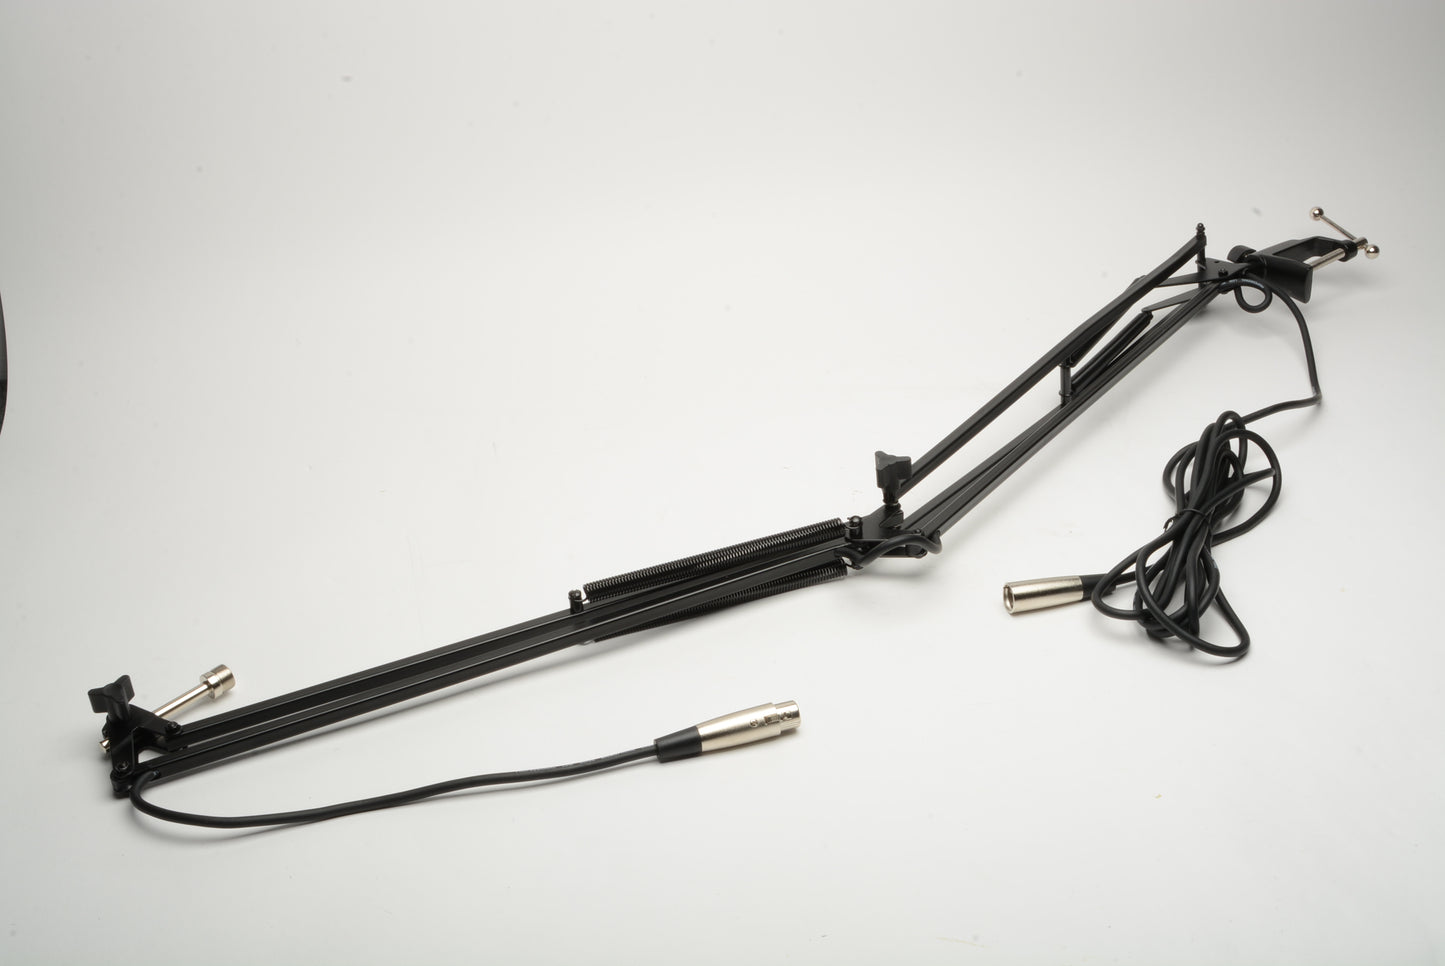 2-Section Broadcast Arm w/Internal Springs & Integrated low noise mic cable + Clamp